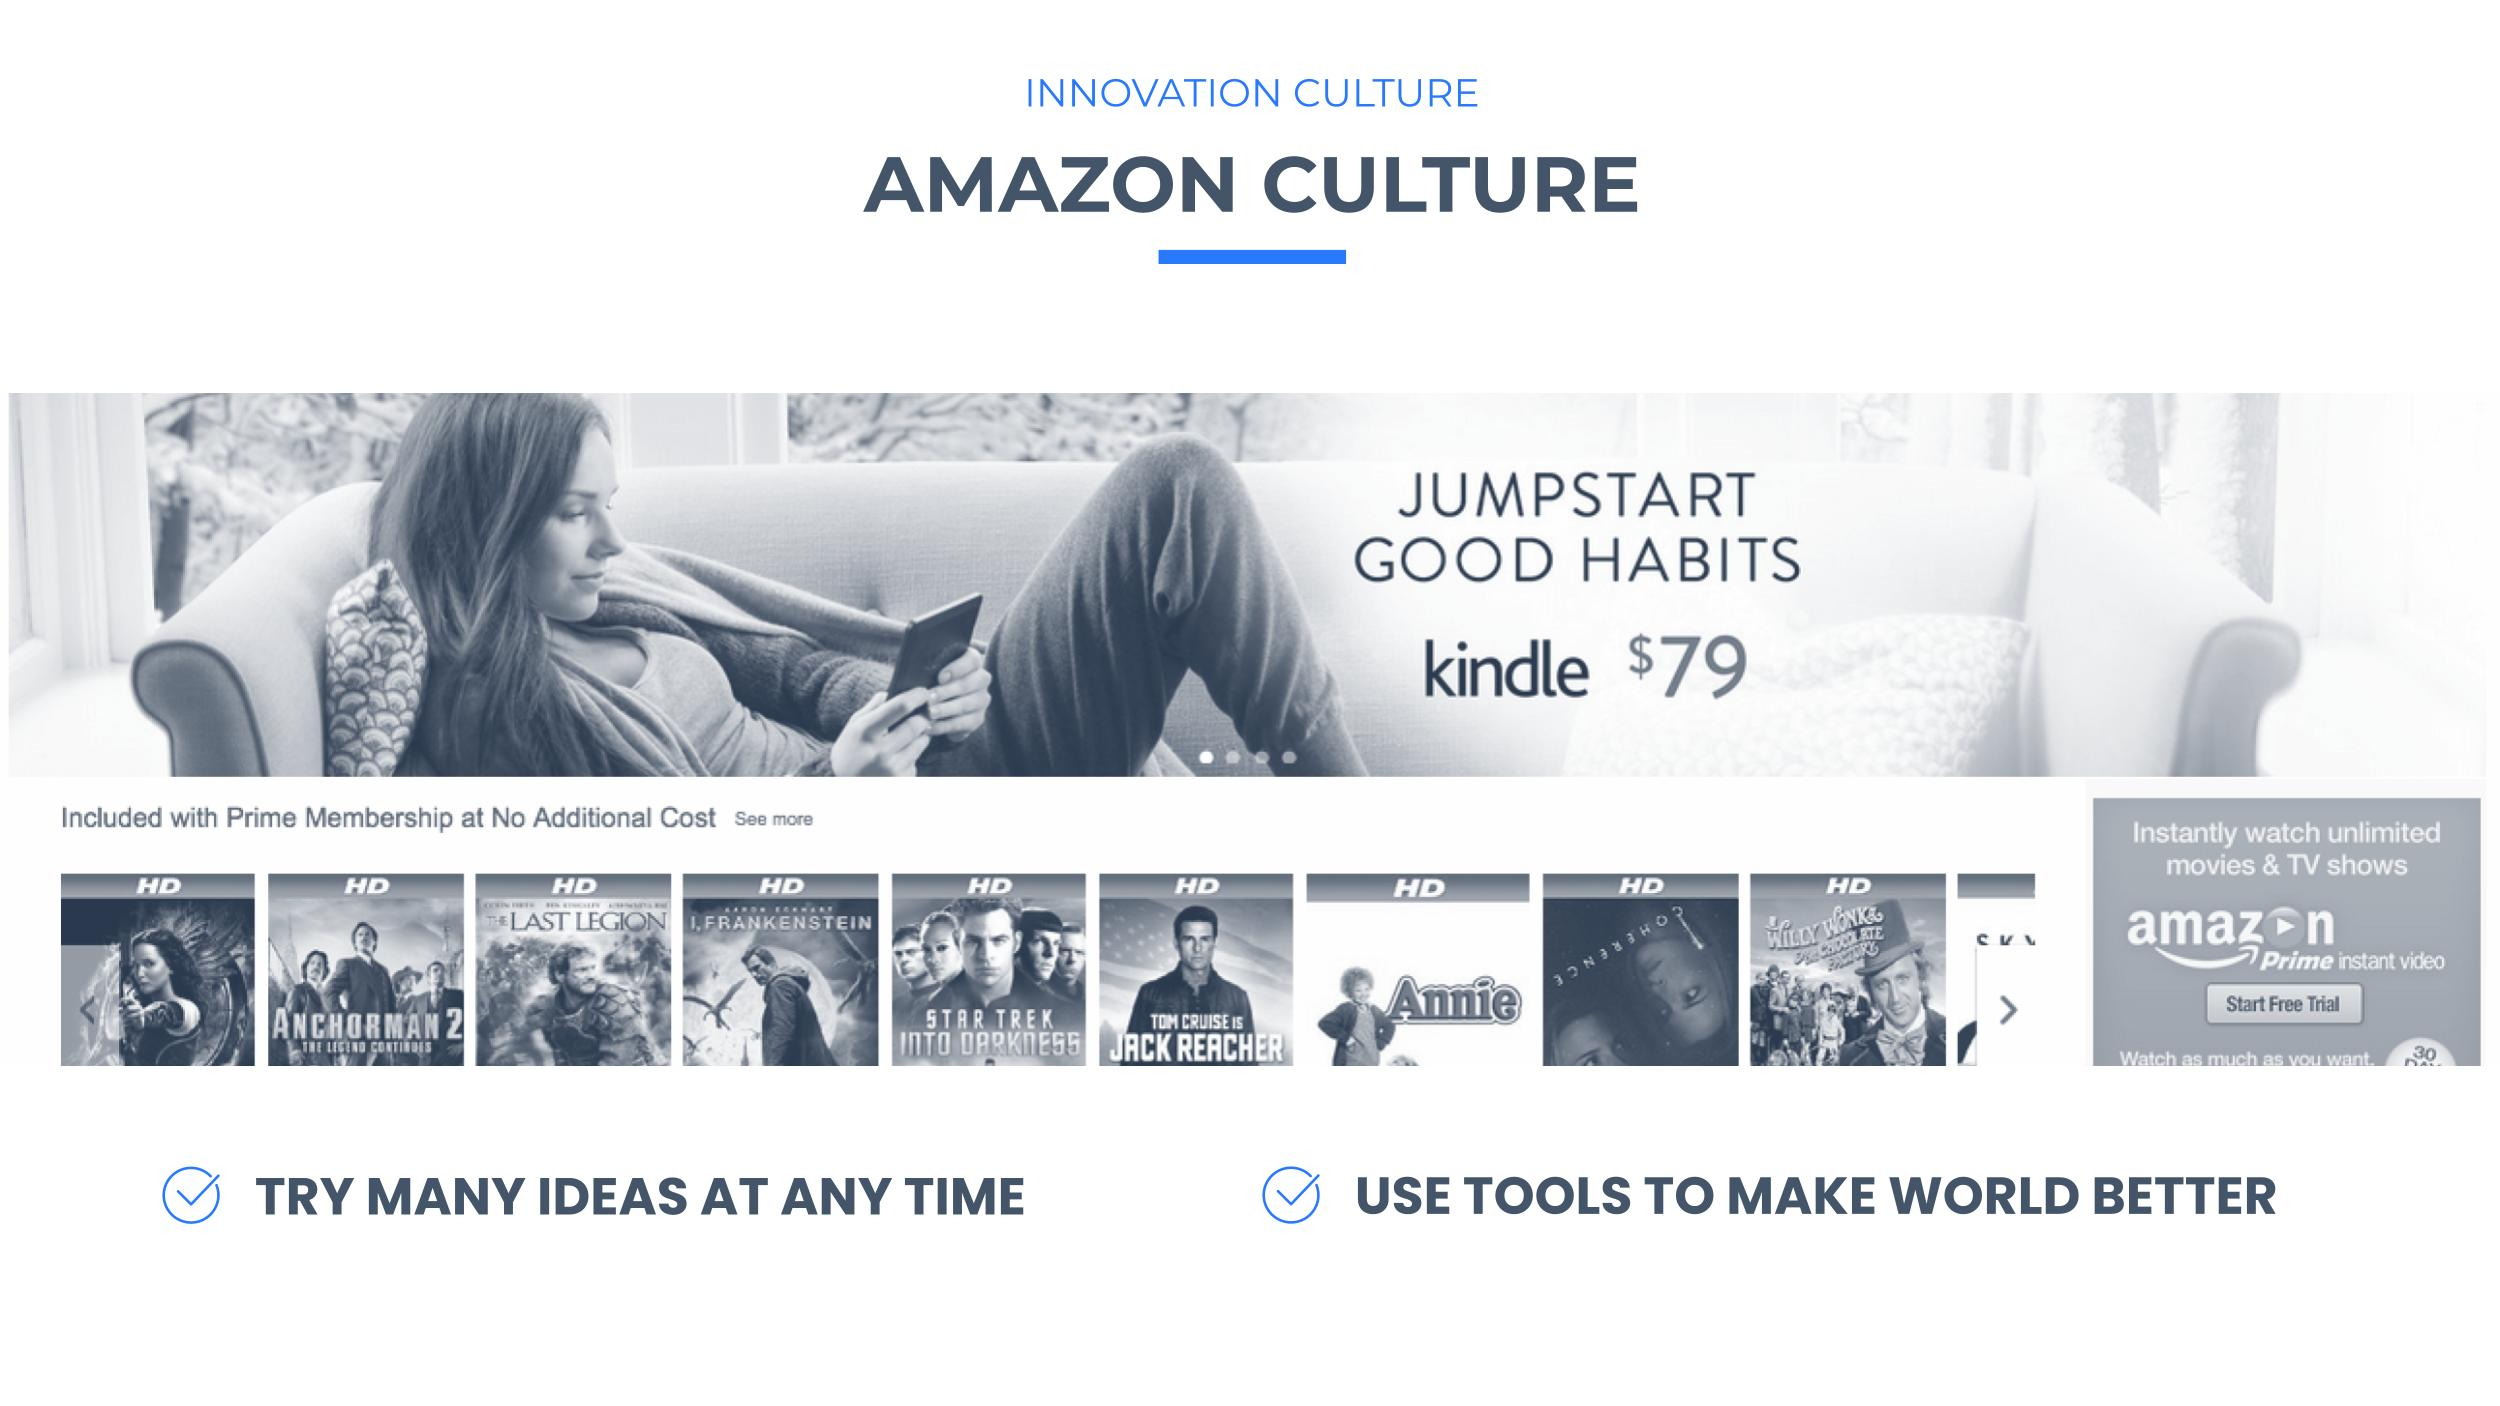 AMAZON innovation culture insists to try many ideas and use tools internally developed